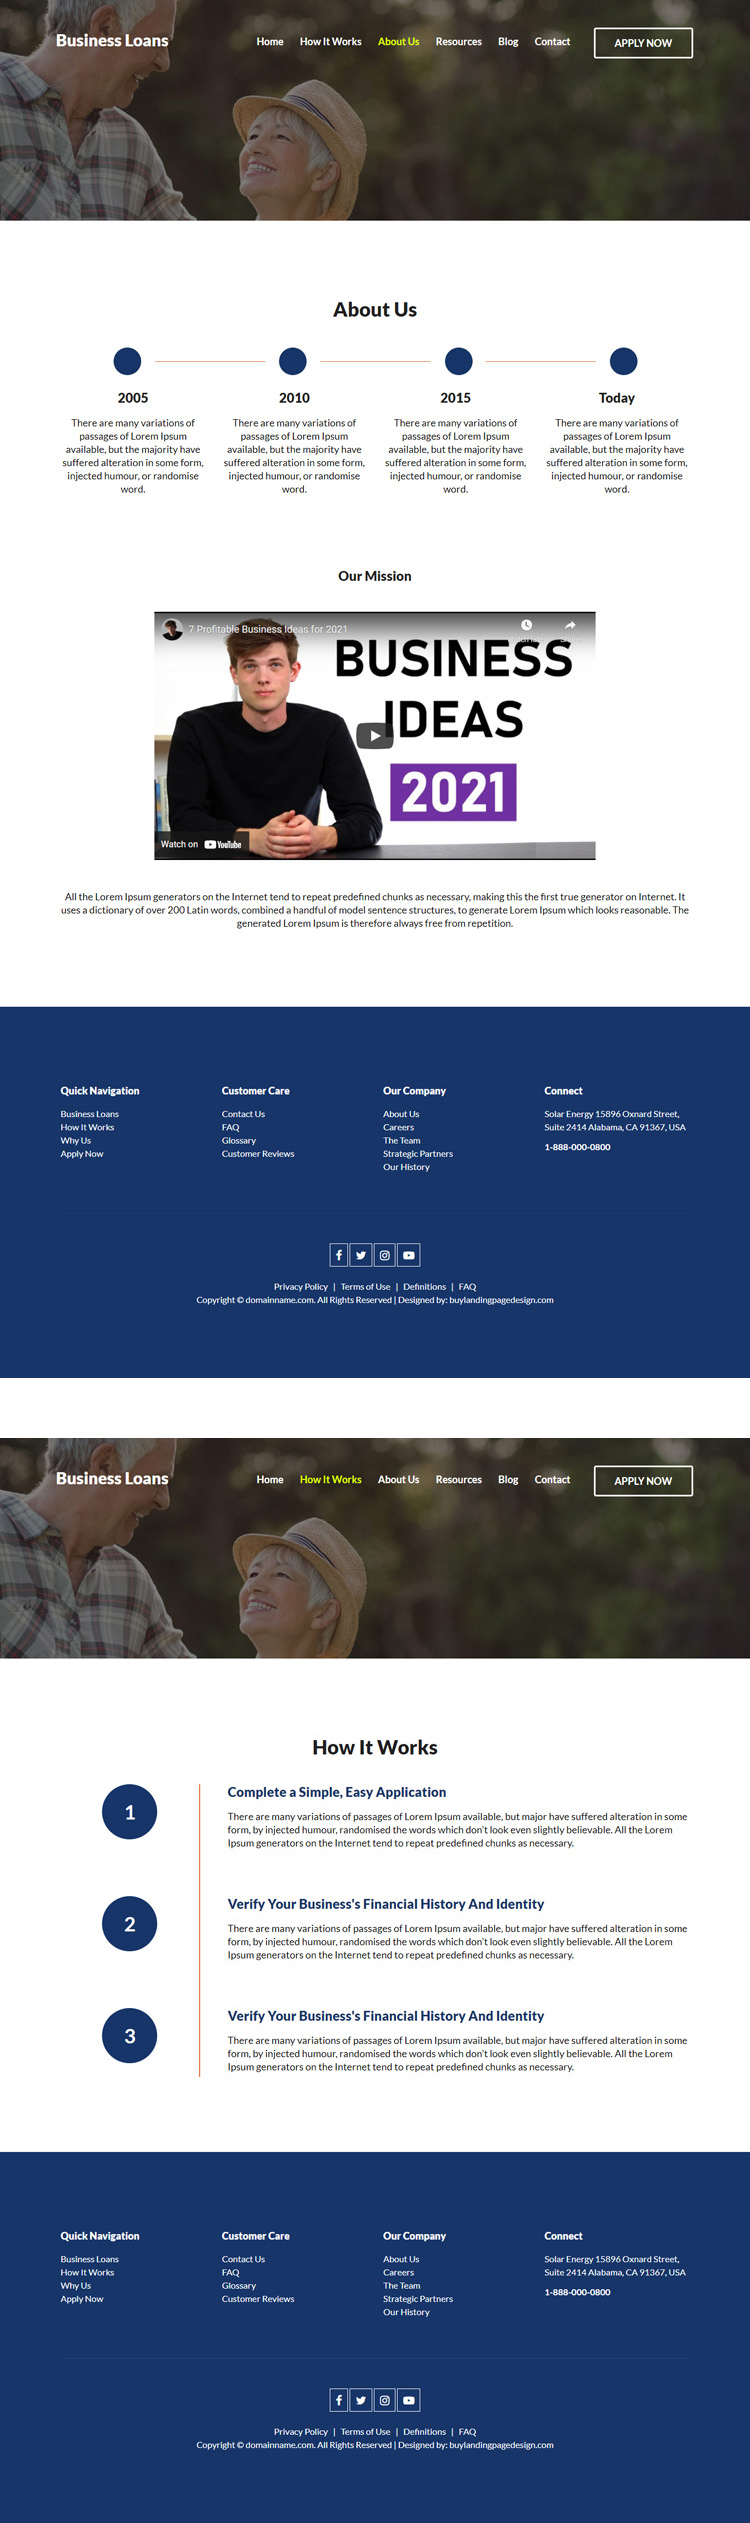 small business loan and financing website design